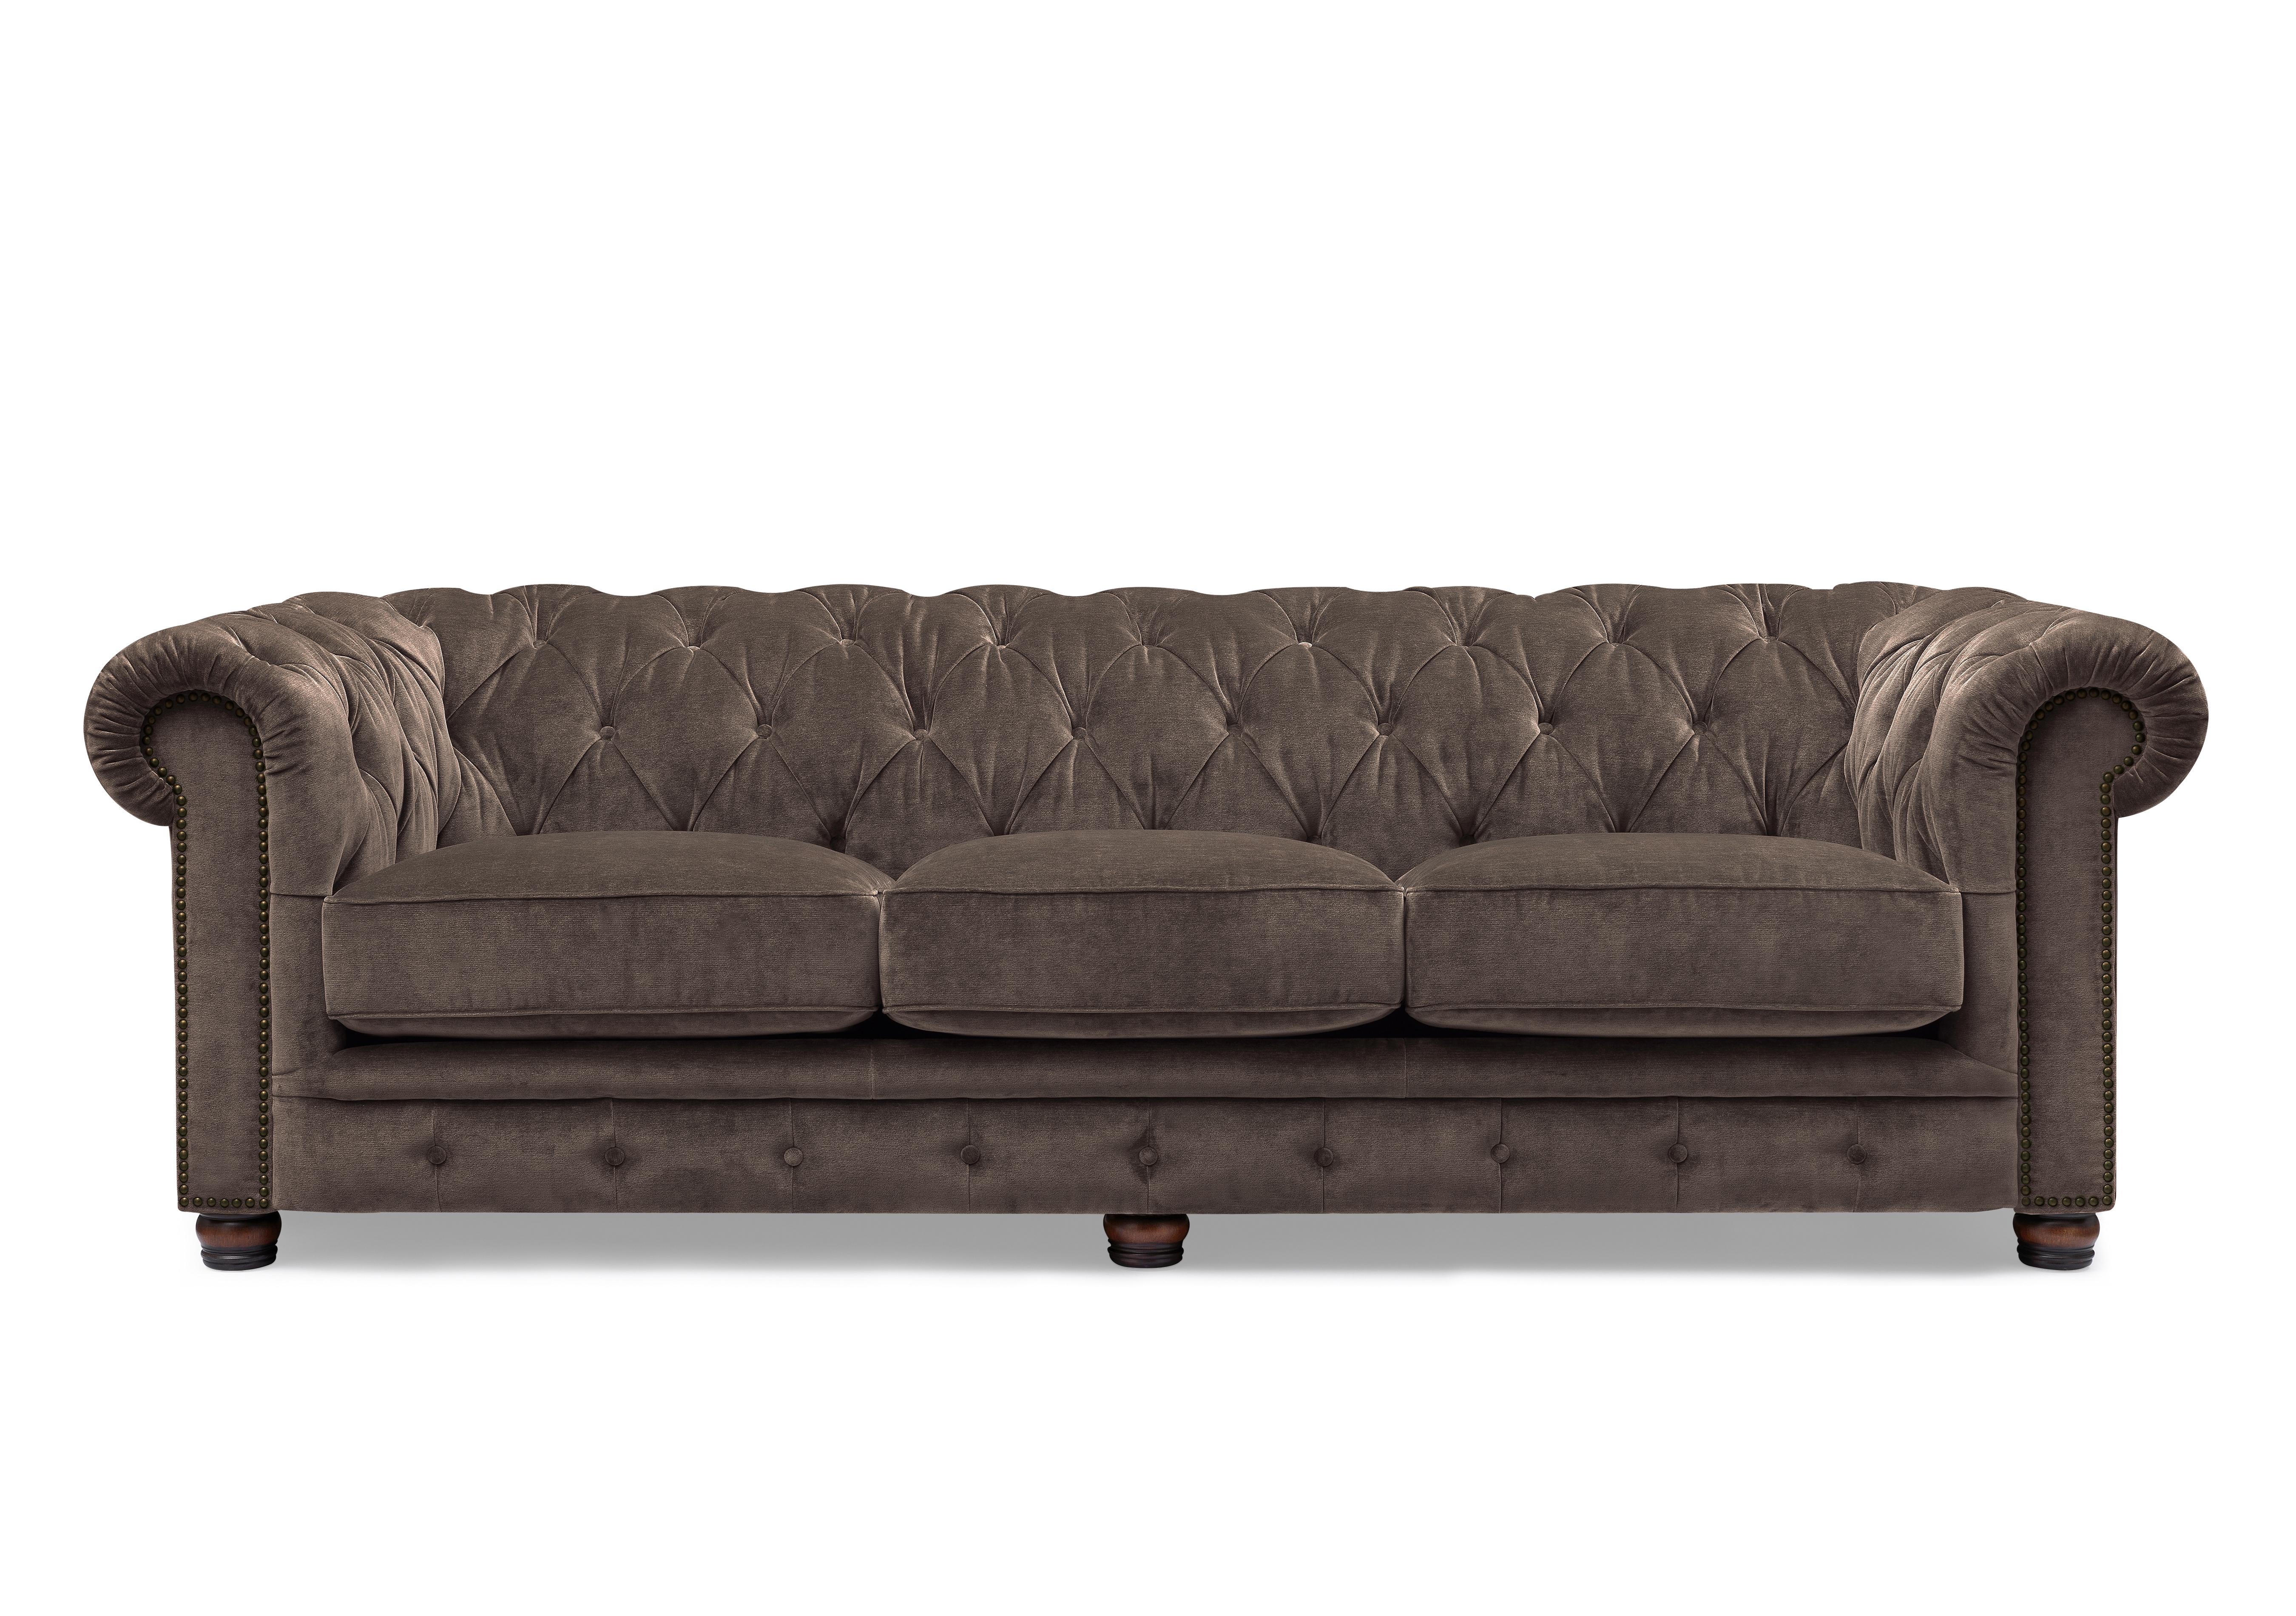 Shackleton 4 Seater Fabric Chesterfield Sofa with USB-C in X3y1-W020 Brindle on Furniture Village